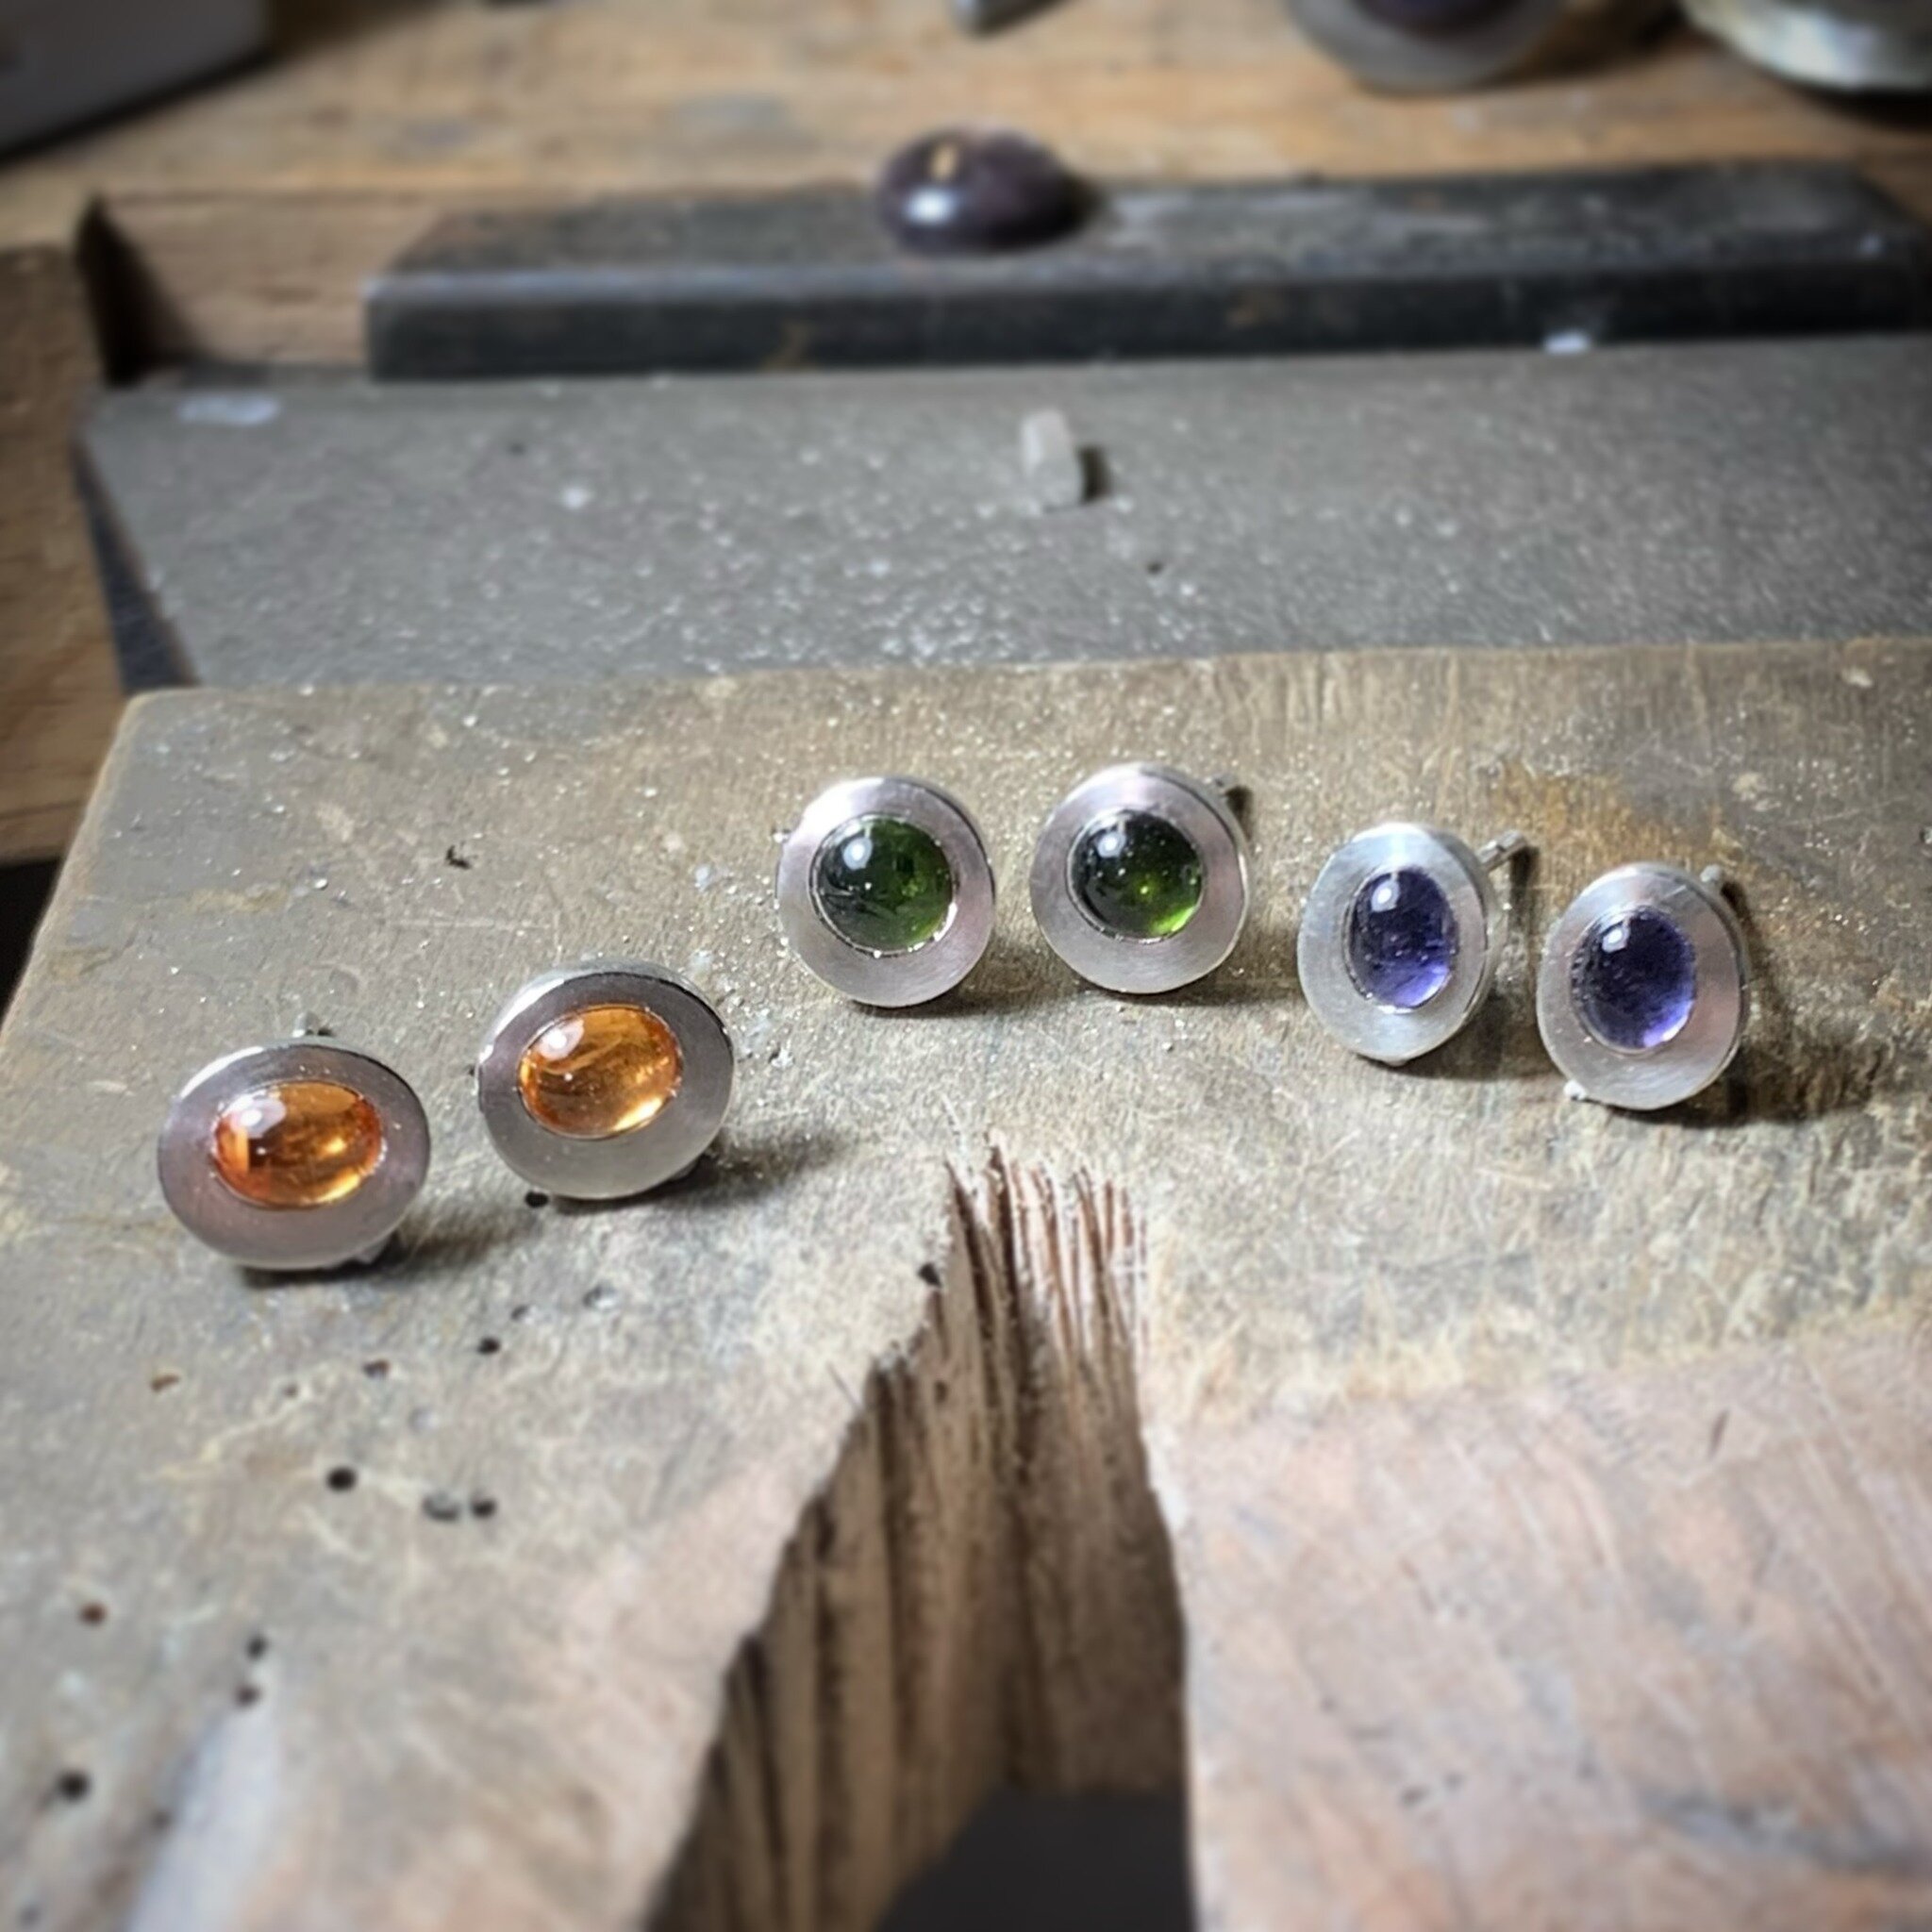 Little parade of sweet studs that will be heading out and looking for new homes very soon! Which colour would you choose? 🤔✨✨✨✨
.
.
.
.
.
.
.
#jewellery #studearrings #silverstuderrings #contemporaryjewellery #handmade #uk #emilythatcher #designerje